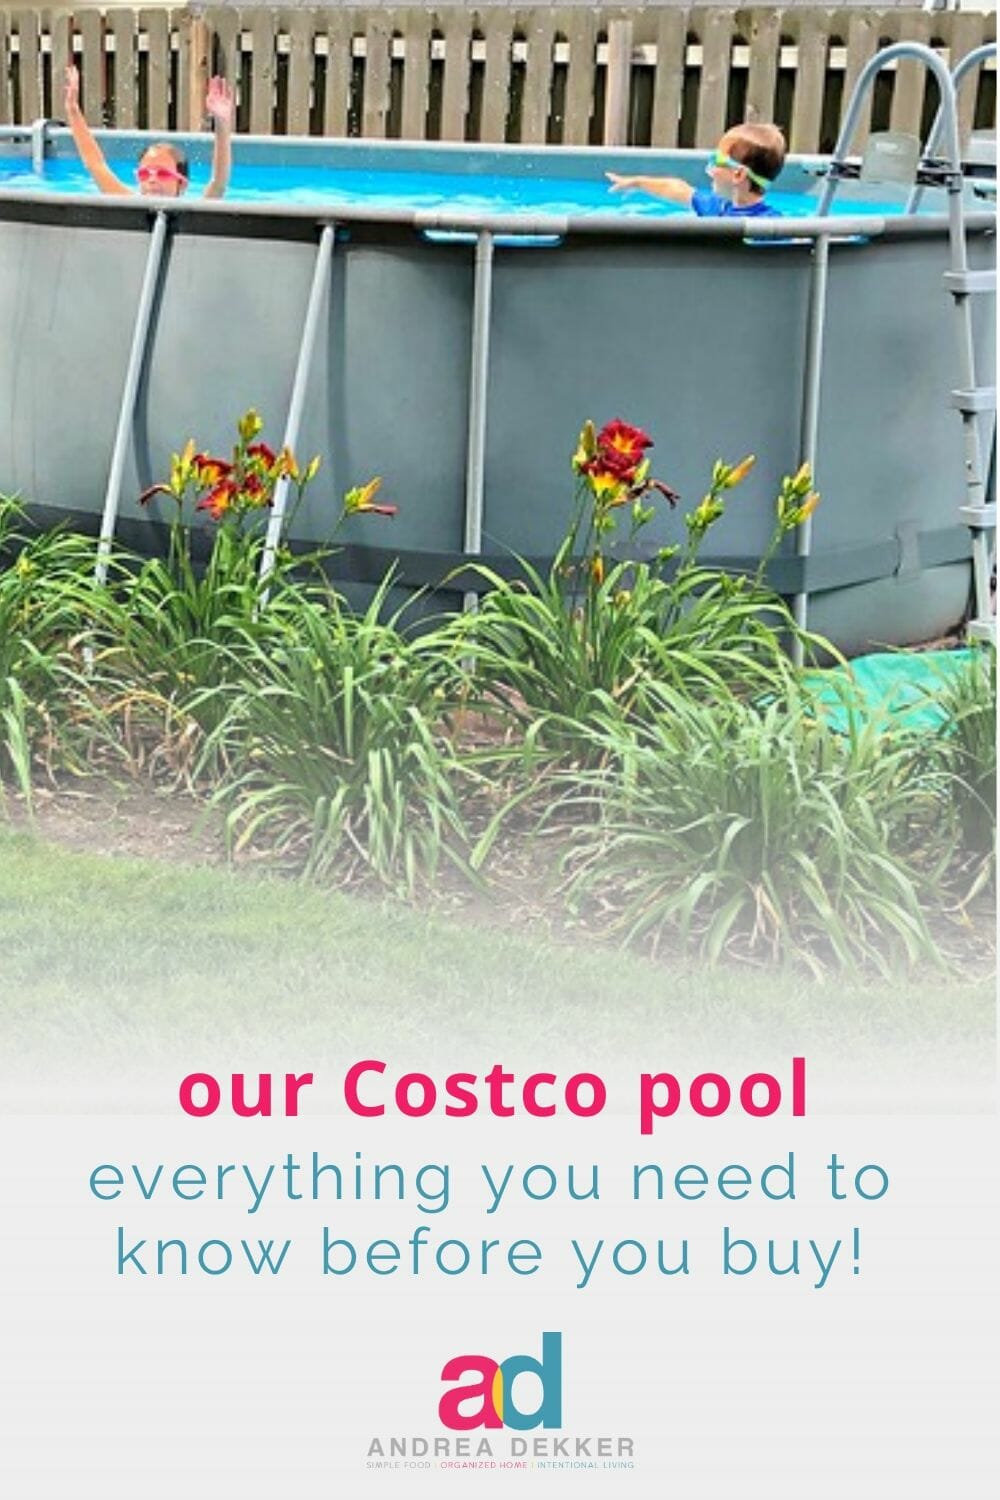 If you're looking for a fun and frugal way to enjoy summer at home with your family, consider getting a pool! Learn everything you ever wanted to know about how to install and set up an above ground Costco swimming pool before you head to the store to buy! via @andreadekker